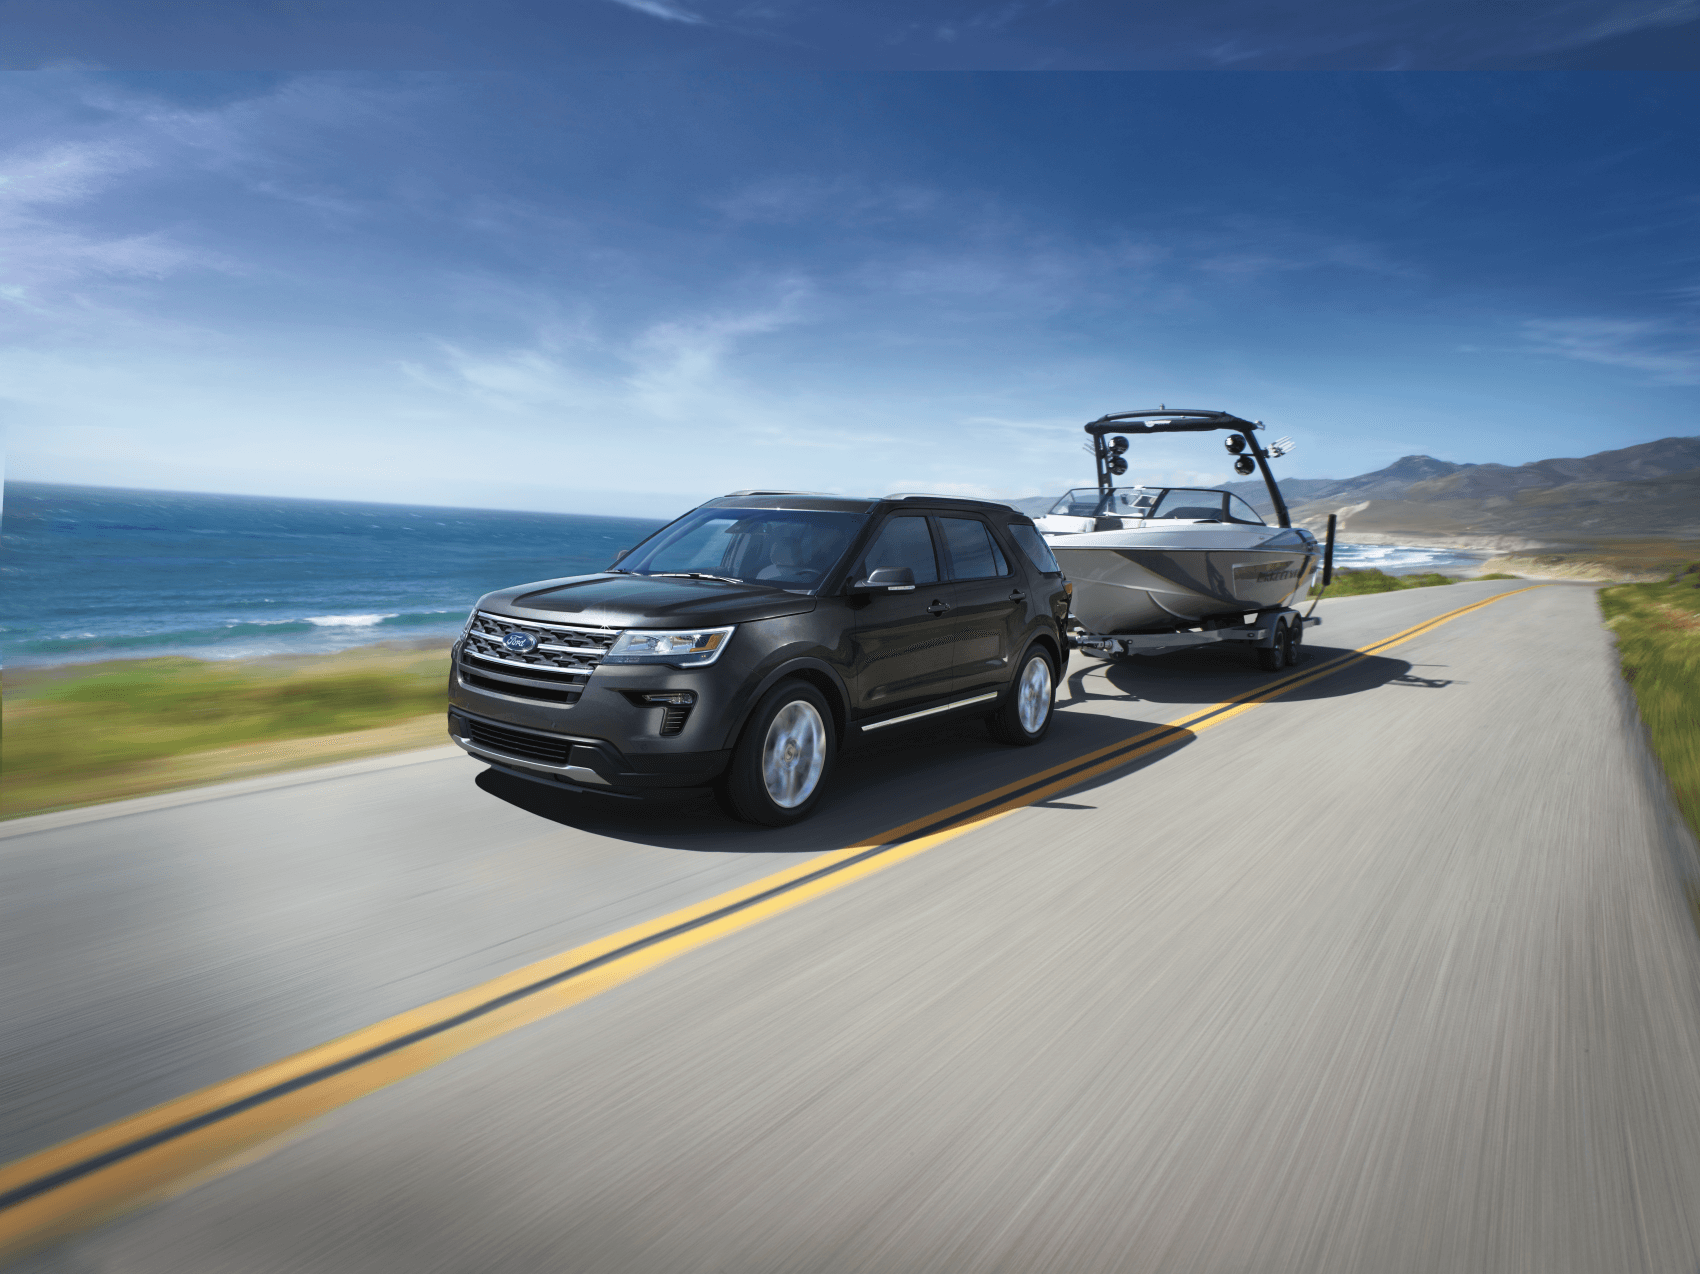 2019 Ford Explorer Towing Boat